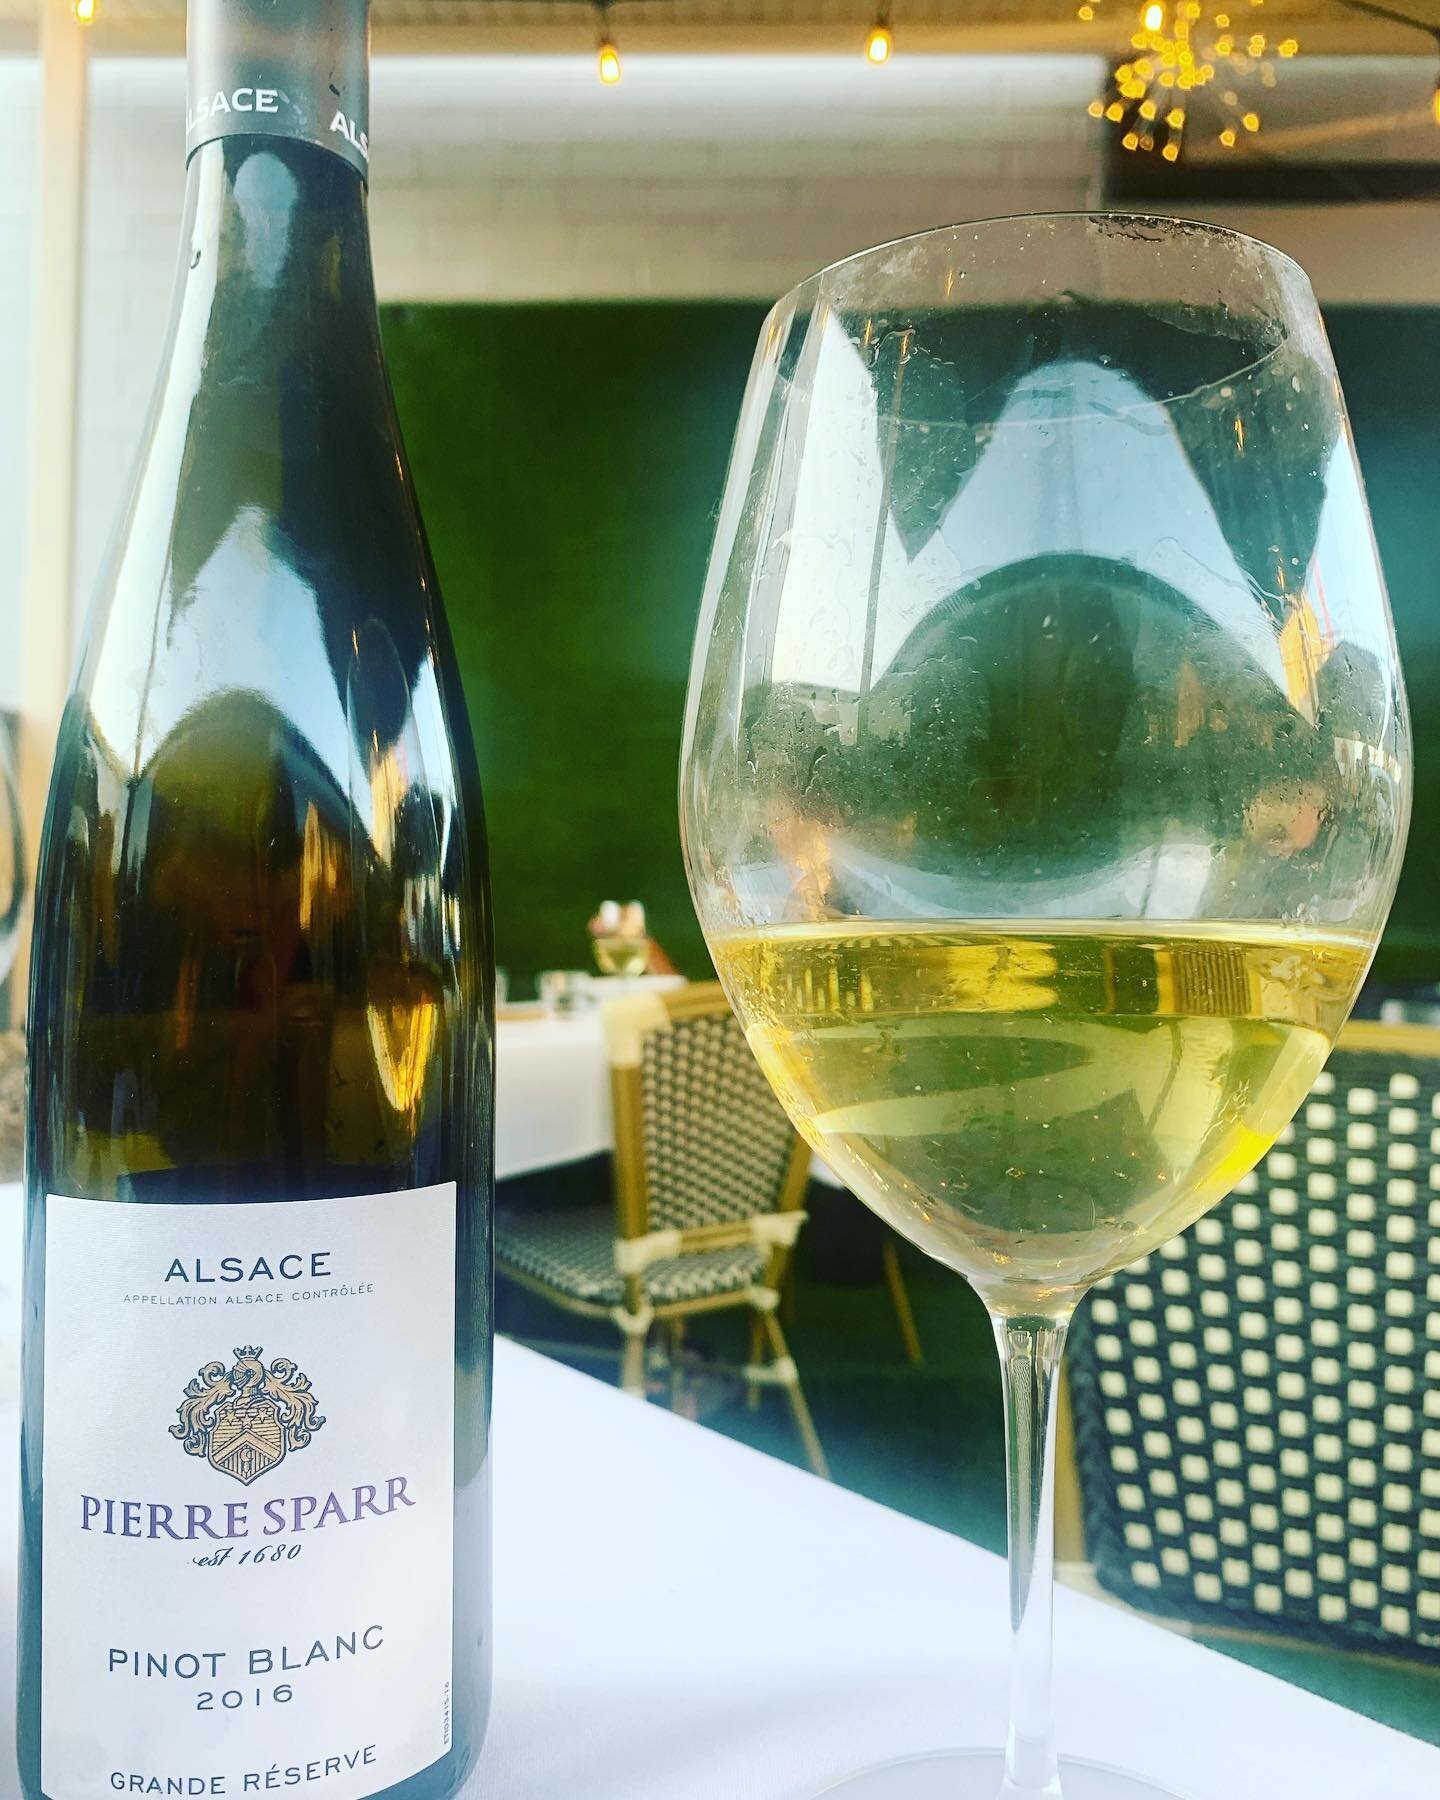 I like the new normal. Sitting outside on a sunny day is the best way to drink white wine
@parcbistrosd

Pierre Sparr, my favorite Alsatian Pinot Blanc is crisp, ripe, and vibrant! 
Tastes like a breath of fresh air. I paired with a cheese board and 